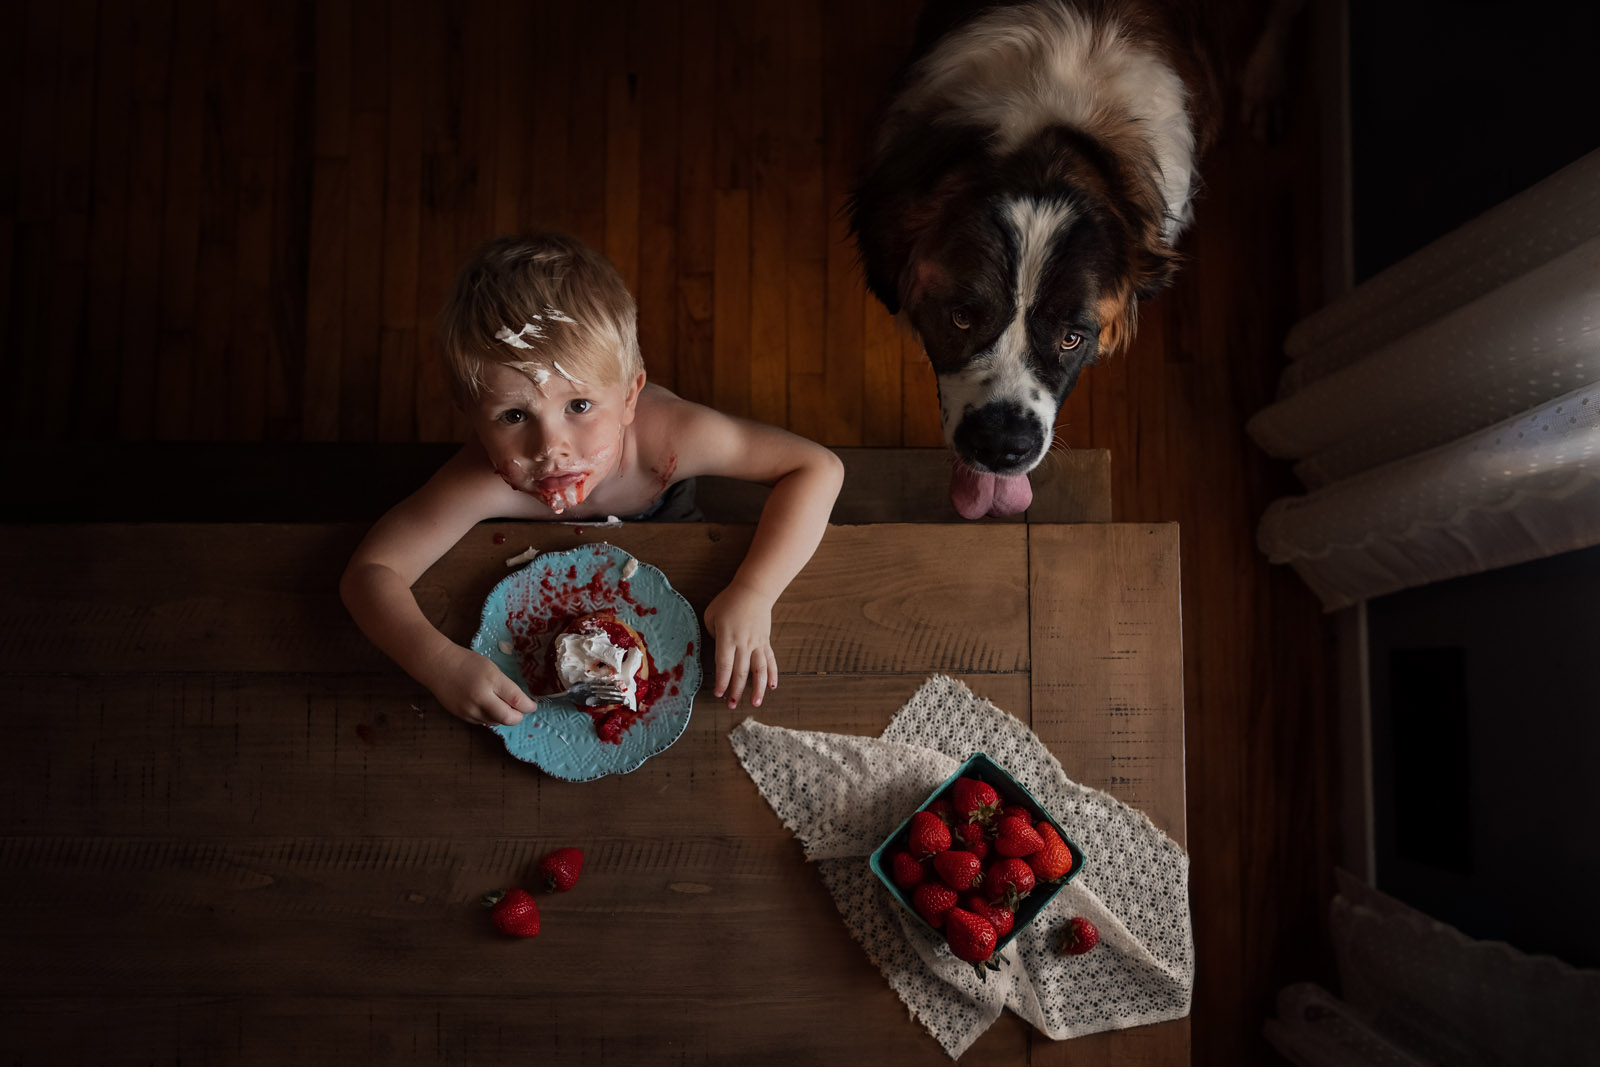 photographing pets small boy eating strawberry shortcake messy with large dog st bernard by meg loeks